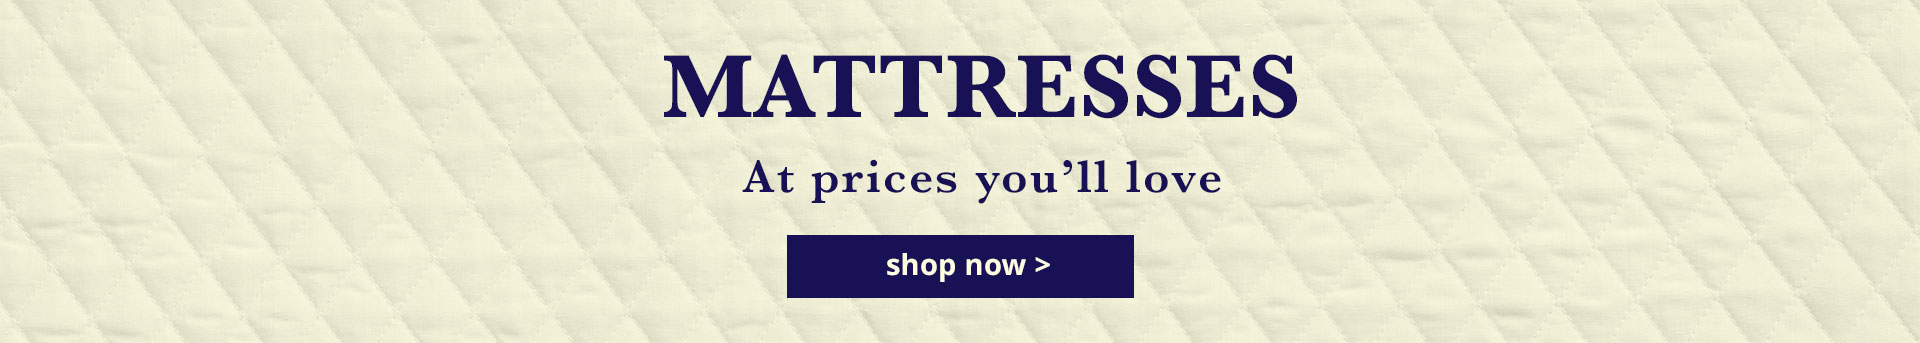 Mattress at prices you'll love